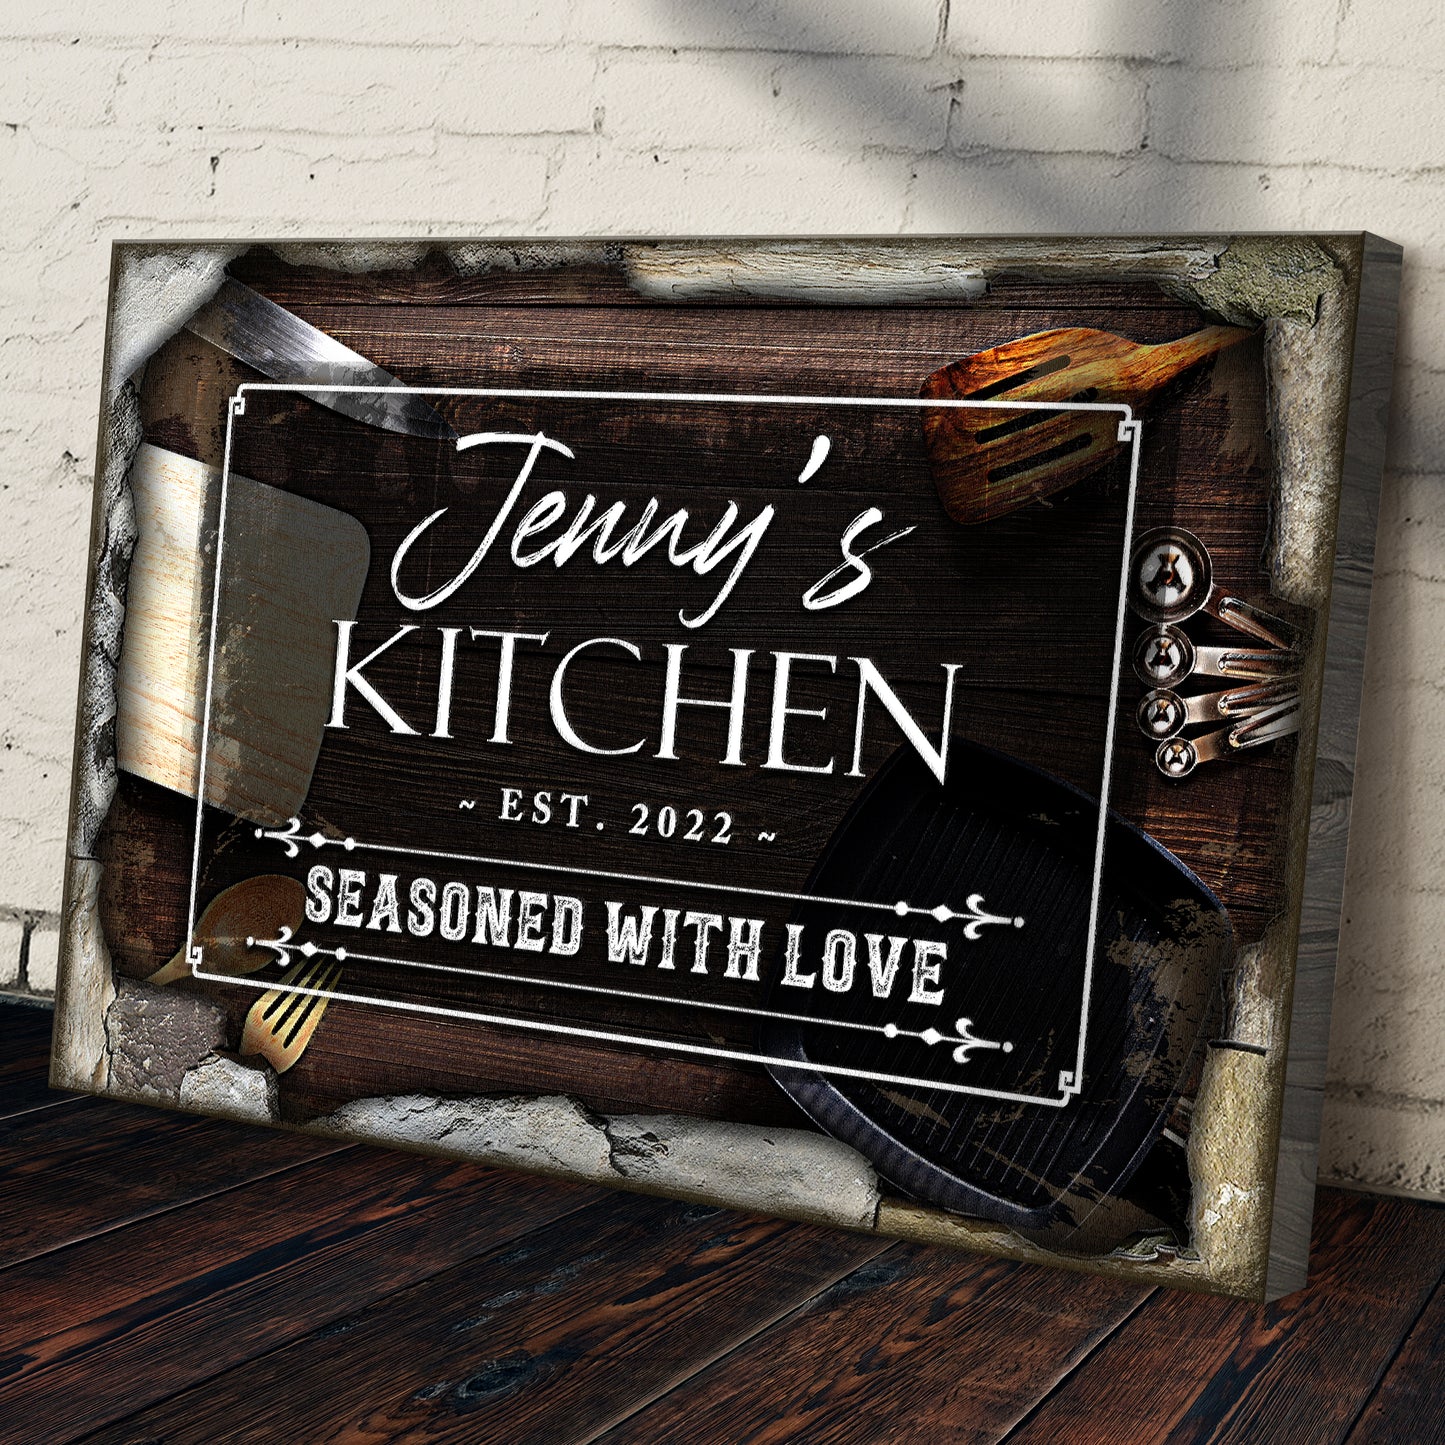 Seasoned with Love Kitchen Sign (Ready to hang) - Wall Art Image by Tailored Canvases